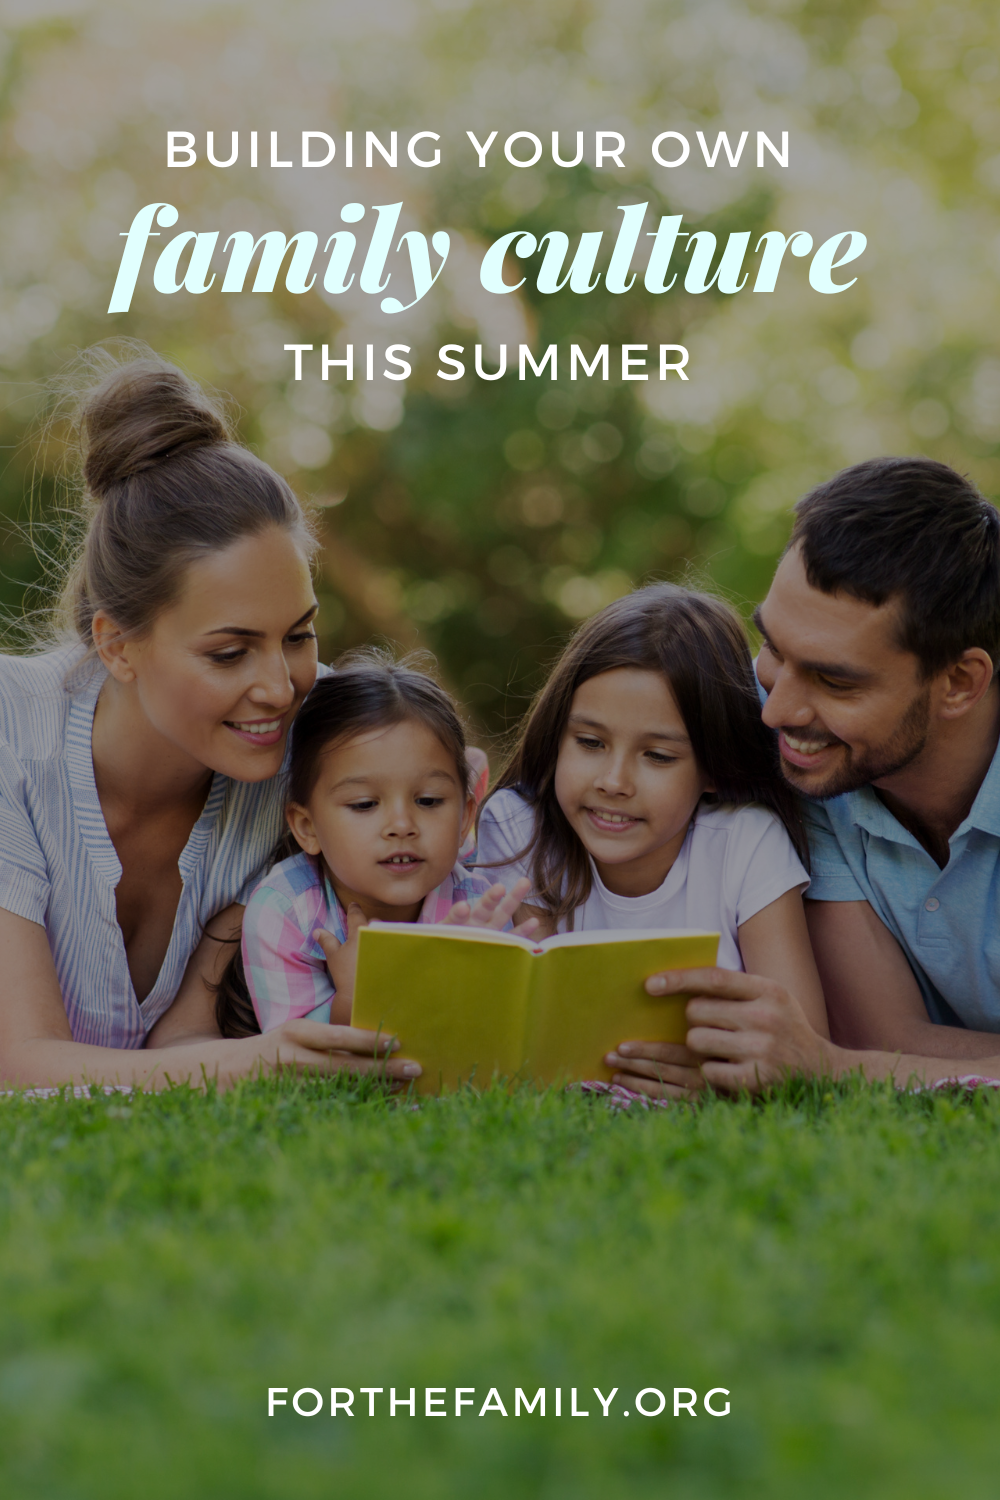 Building Your Own Family Culture this Summer